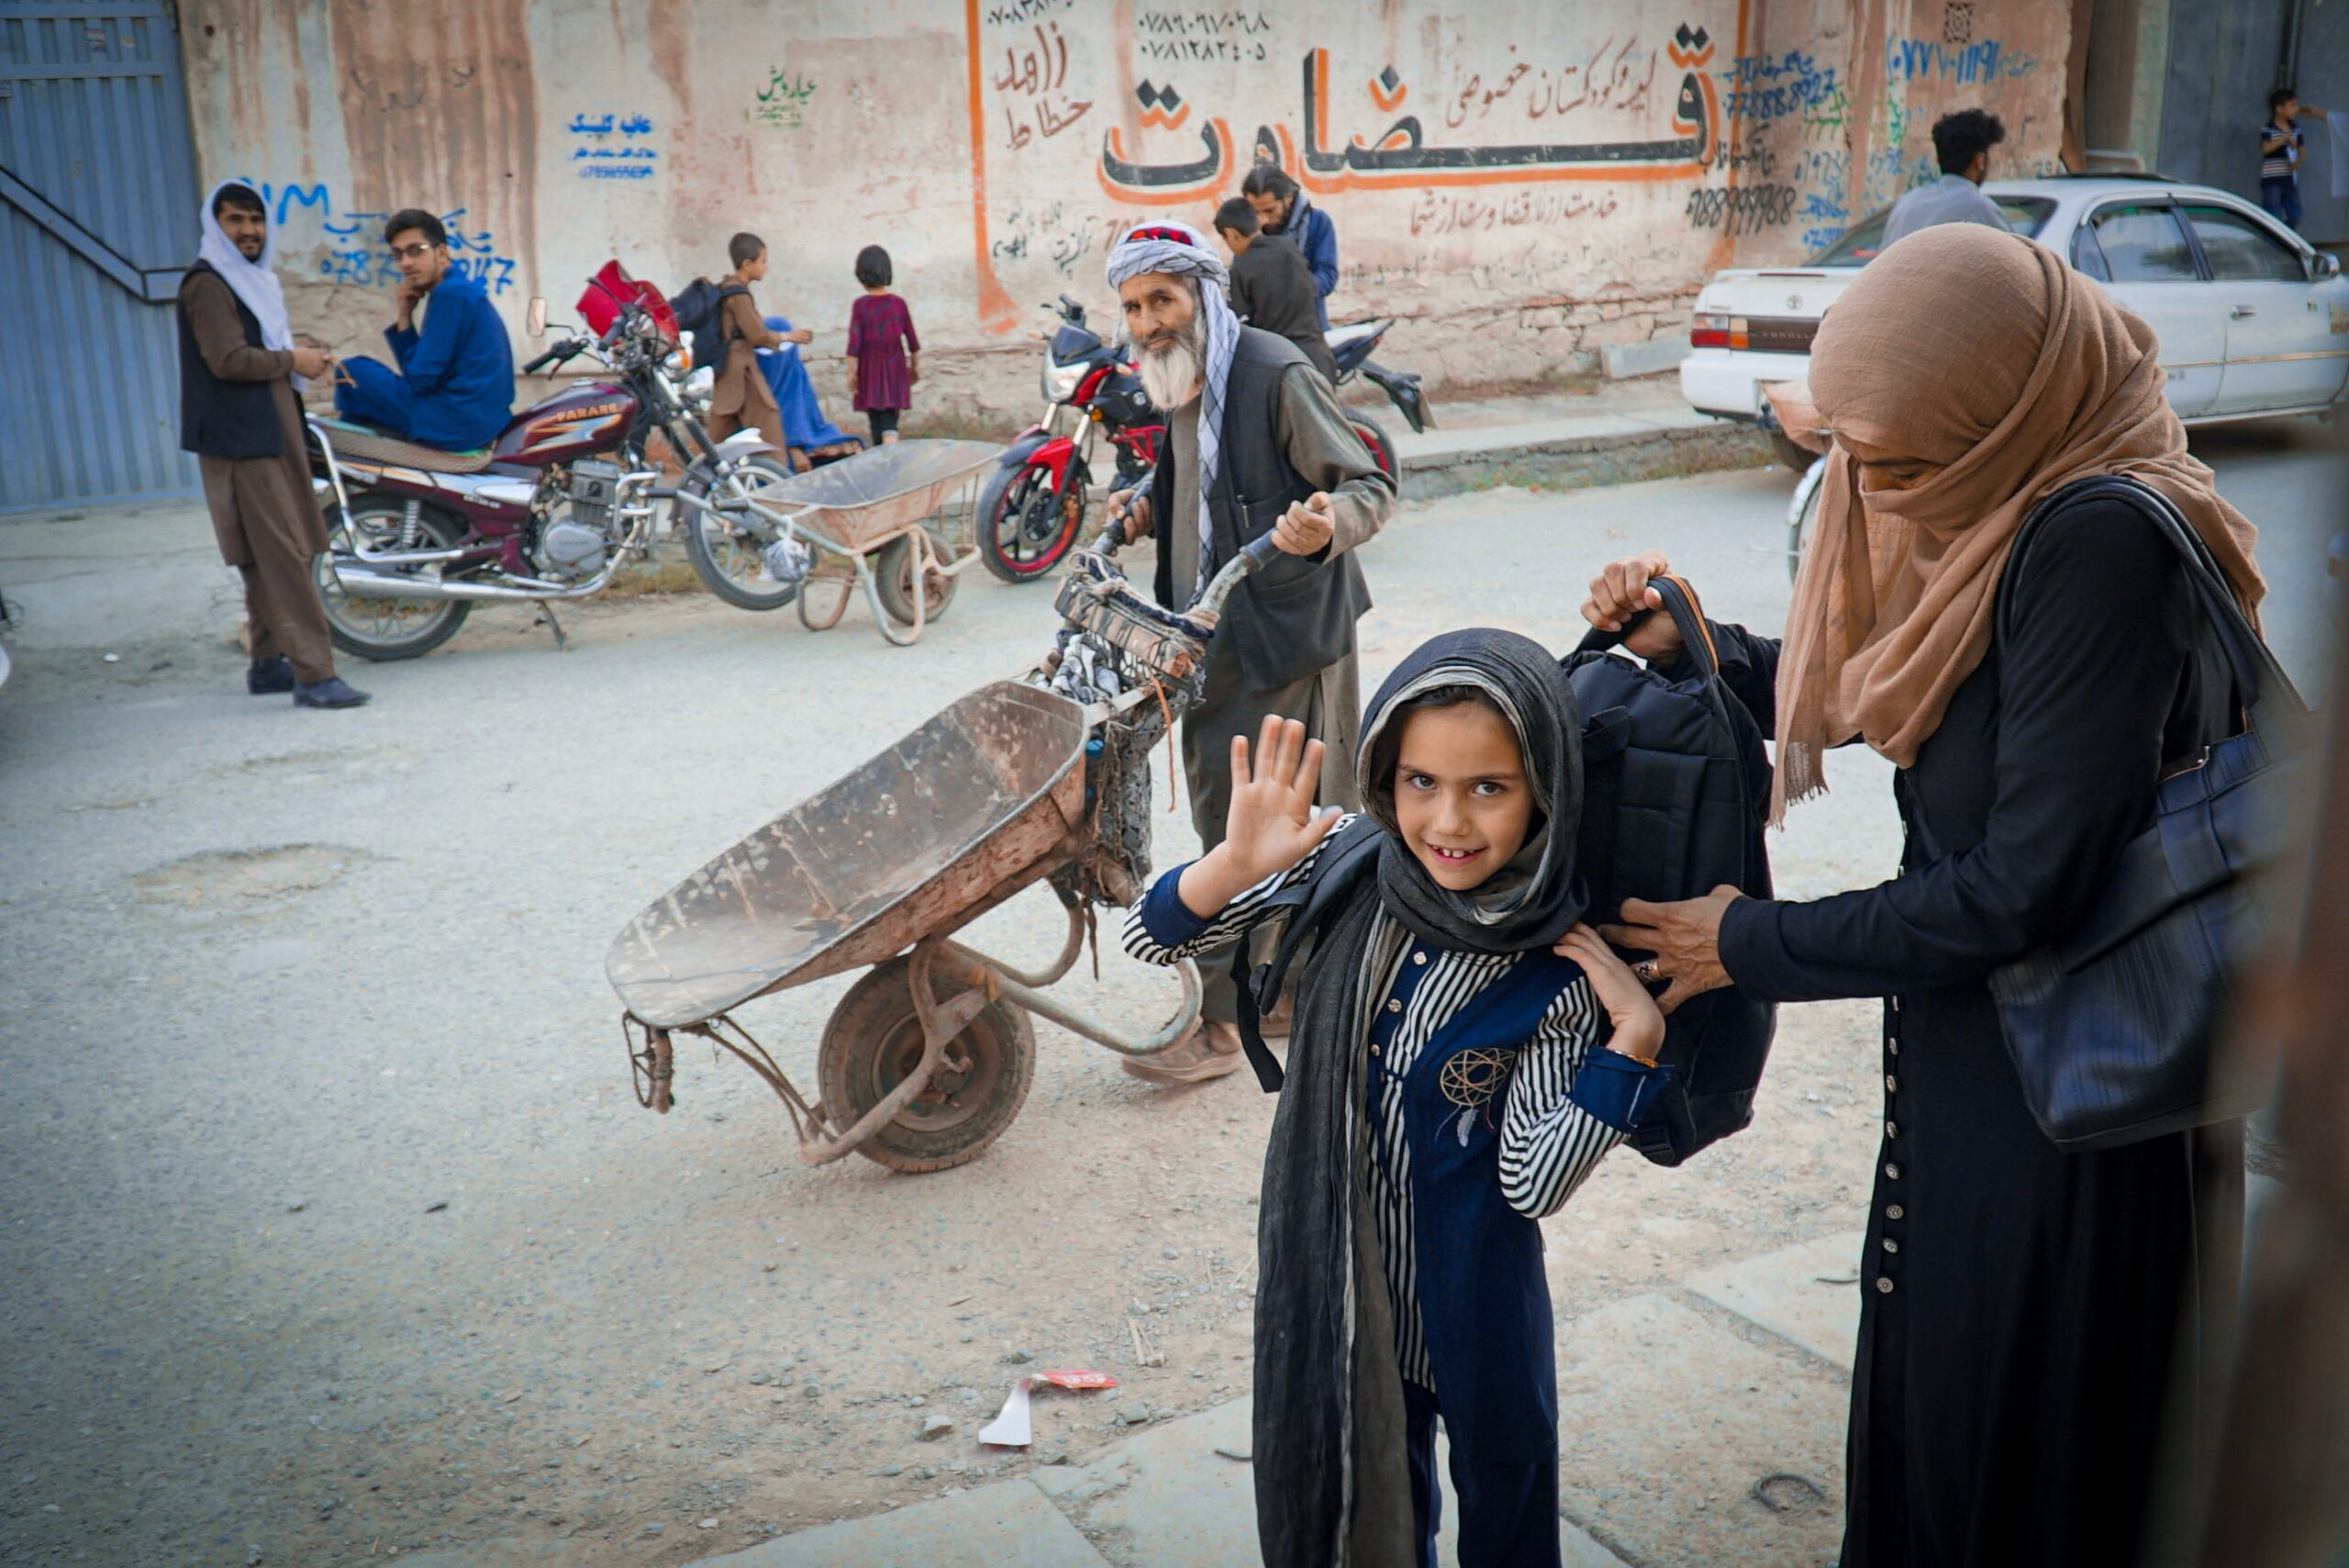 Two years on: Afghan Girls are Denied Their Right to Education